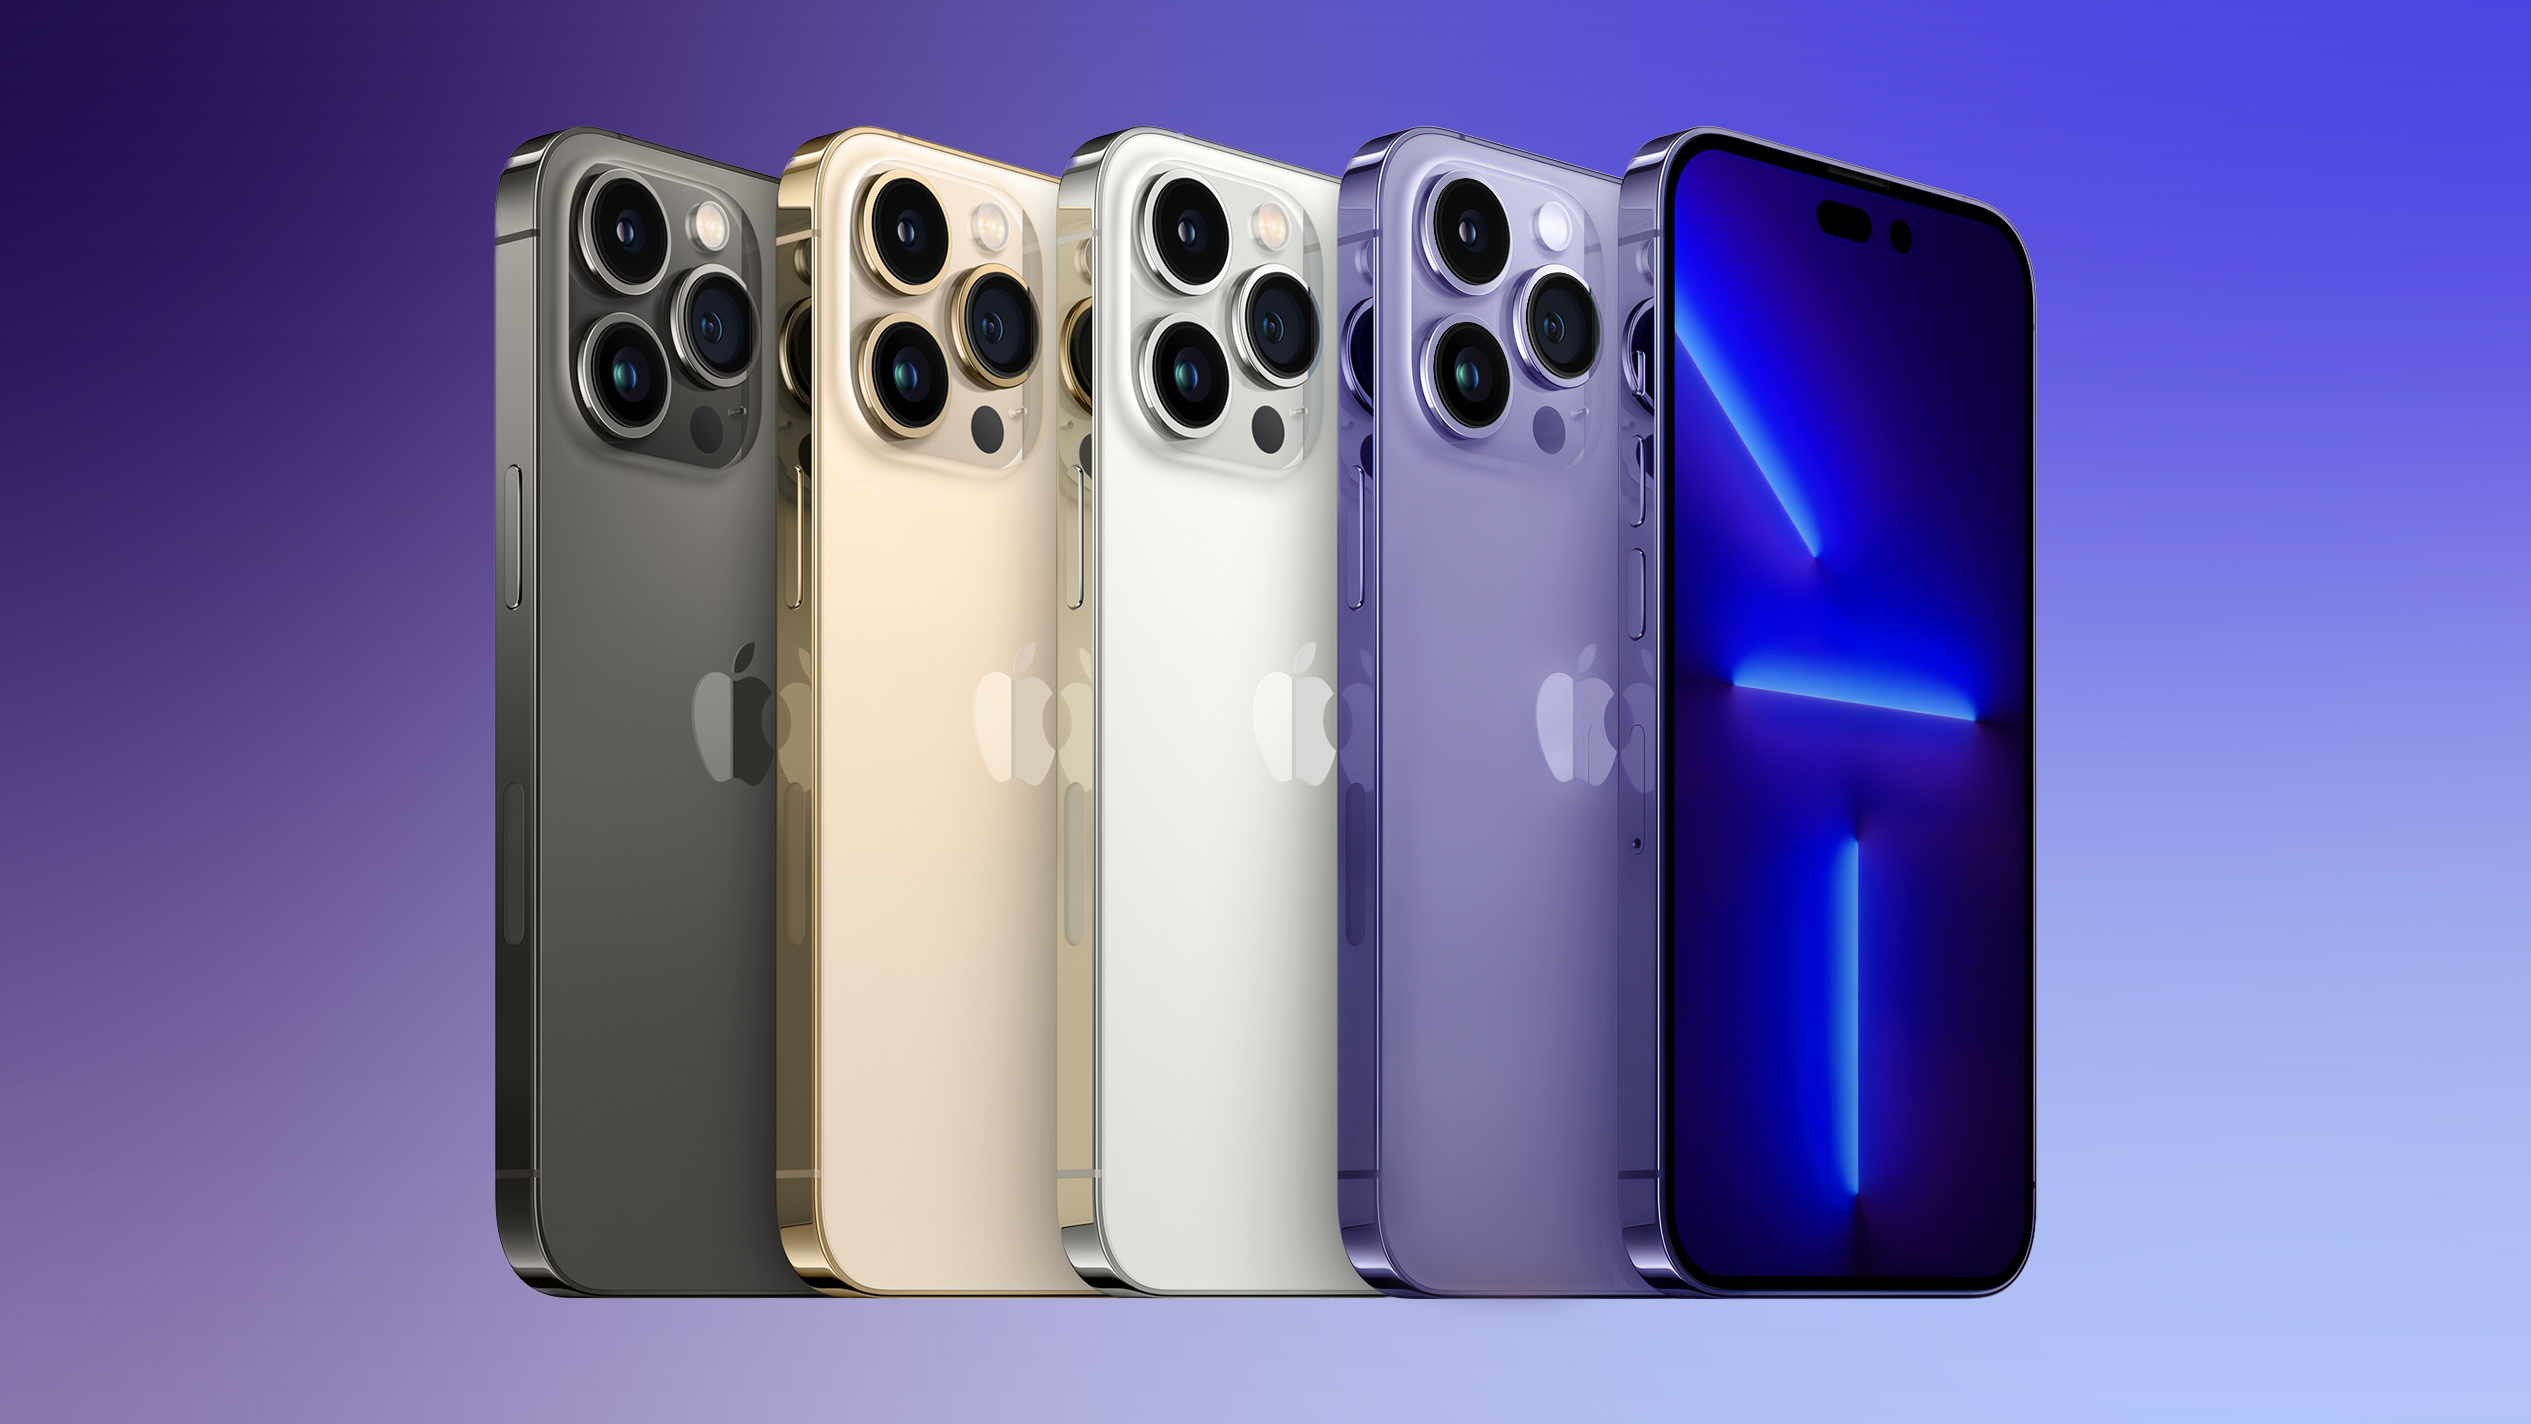 Only the Pro Models in iPhone 14 Lineup Will Feature Upgraded A16 Chip, Another Report Says